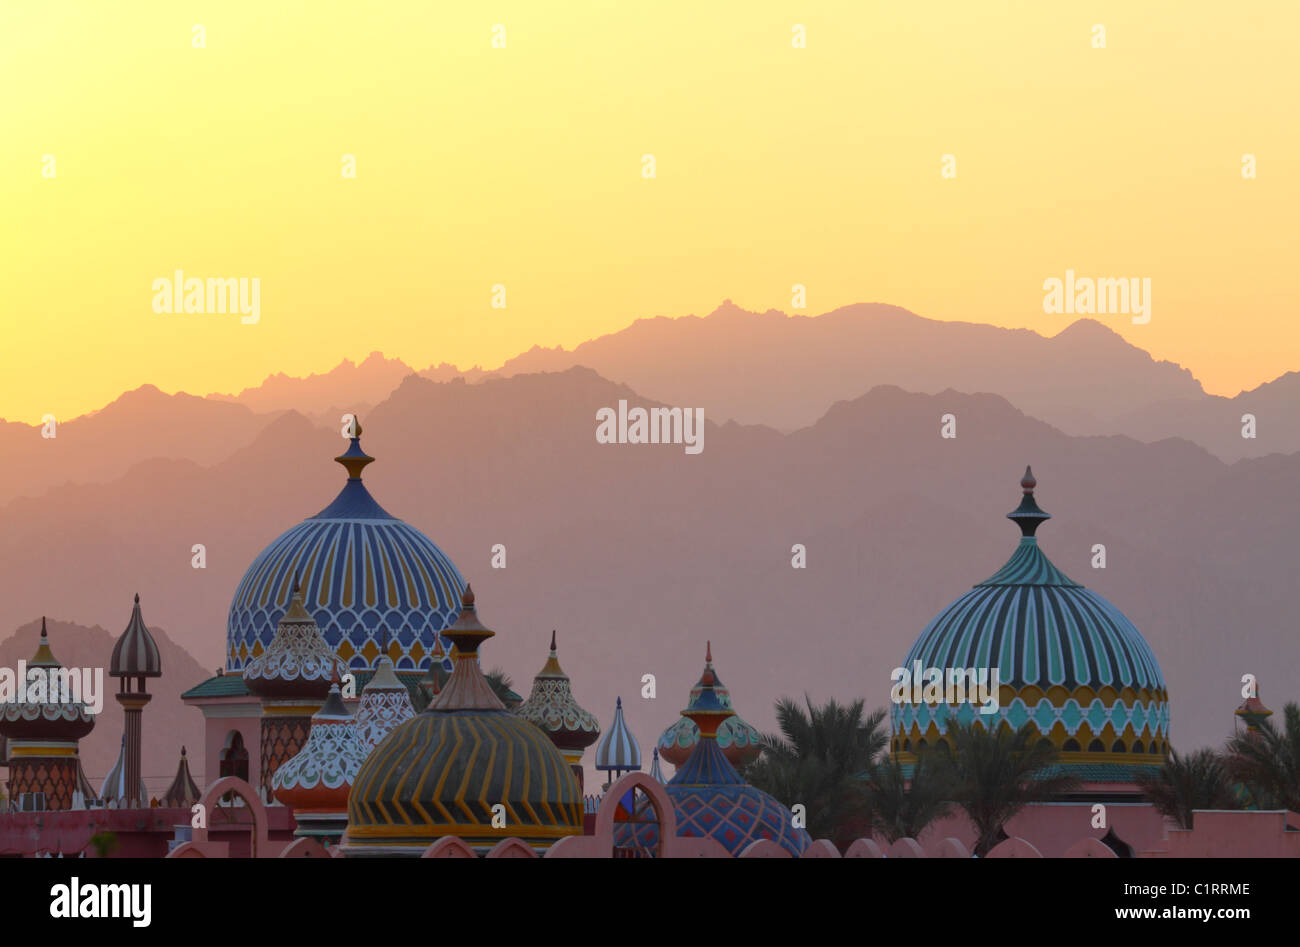 ALF LEILA WA LEILA FANTASIA shopping center. East of mosques domes against mountains during a sunset. Stock Photo